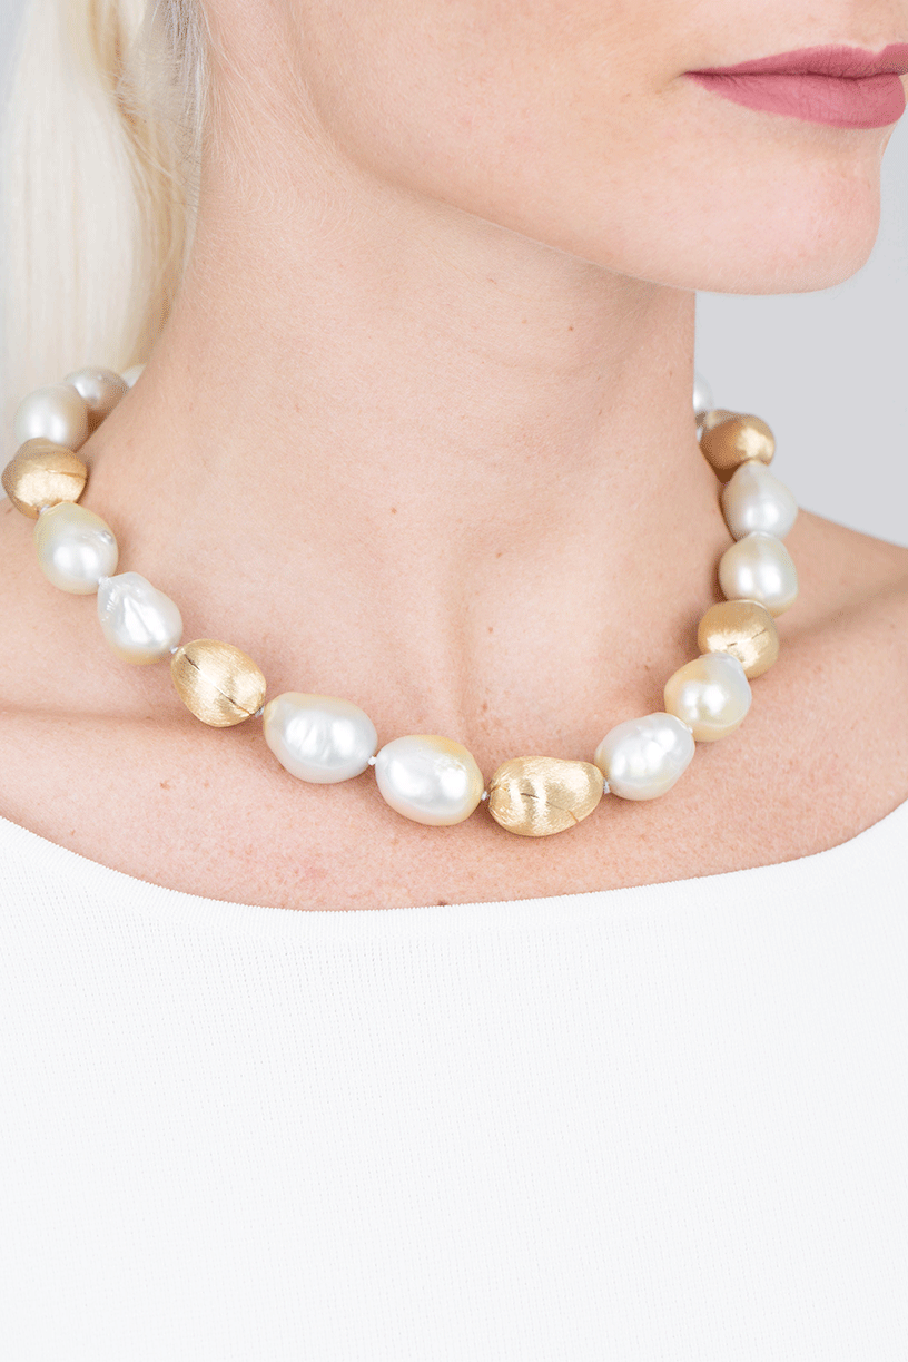 YVEL-Baroque Pearl Necklace-YELLOW GOLD